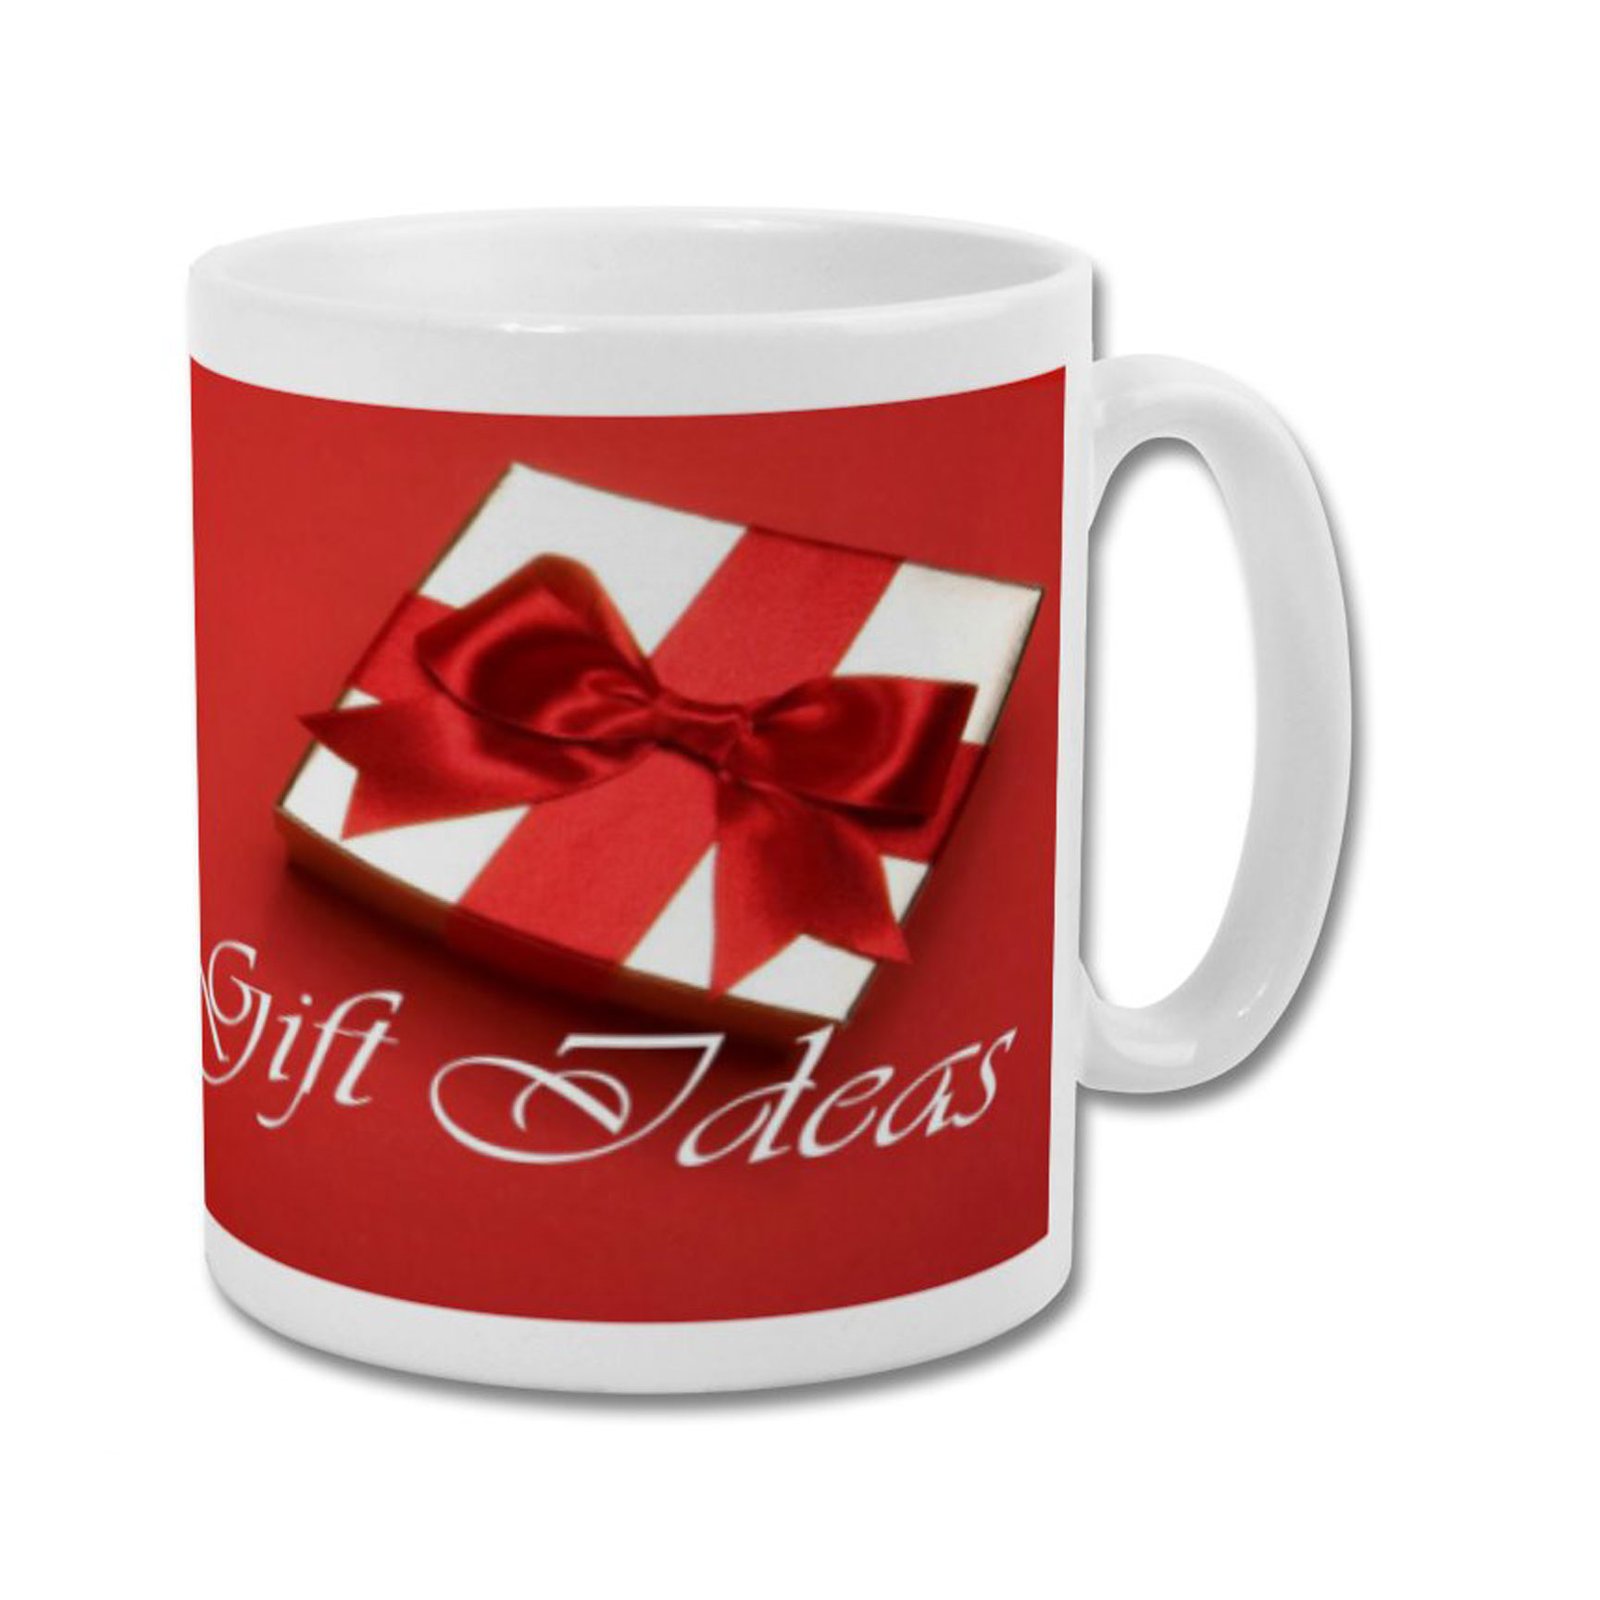 Customized Gifts: Personalized Photo Gifts Online Gift Fast Delivery